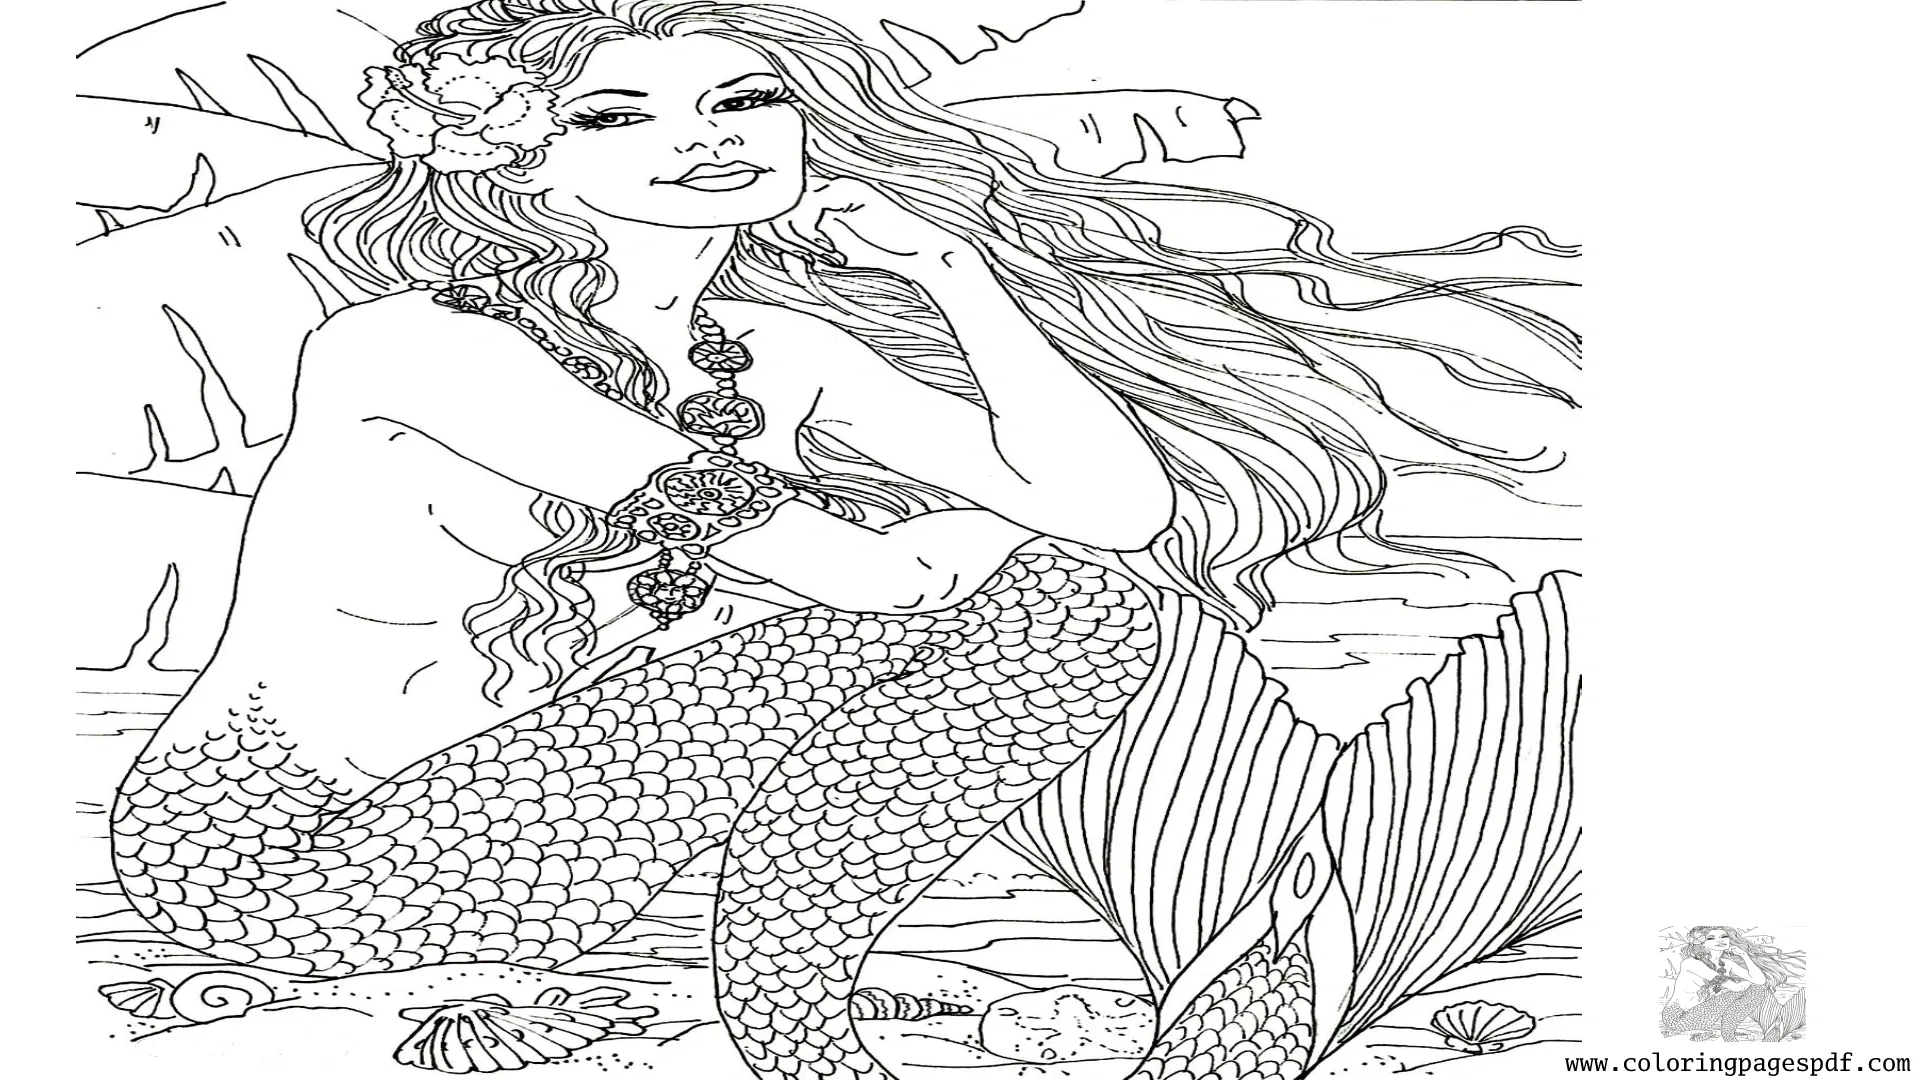 Coloring Page Of A Mermaid Sitting Down